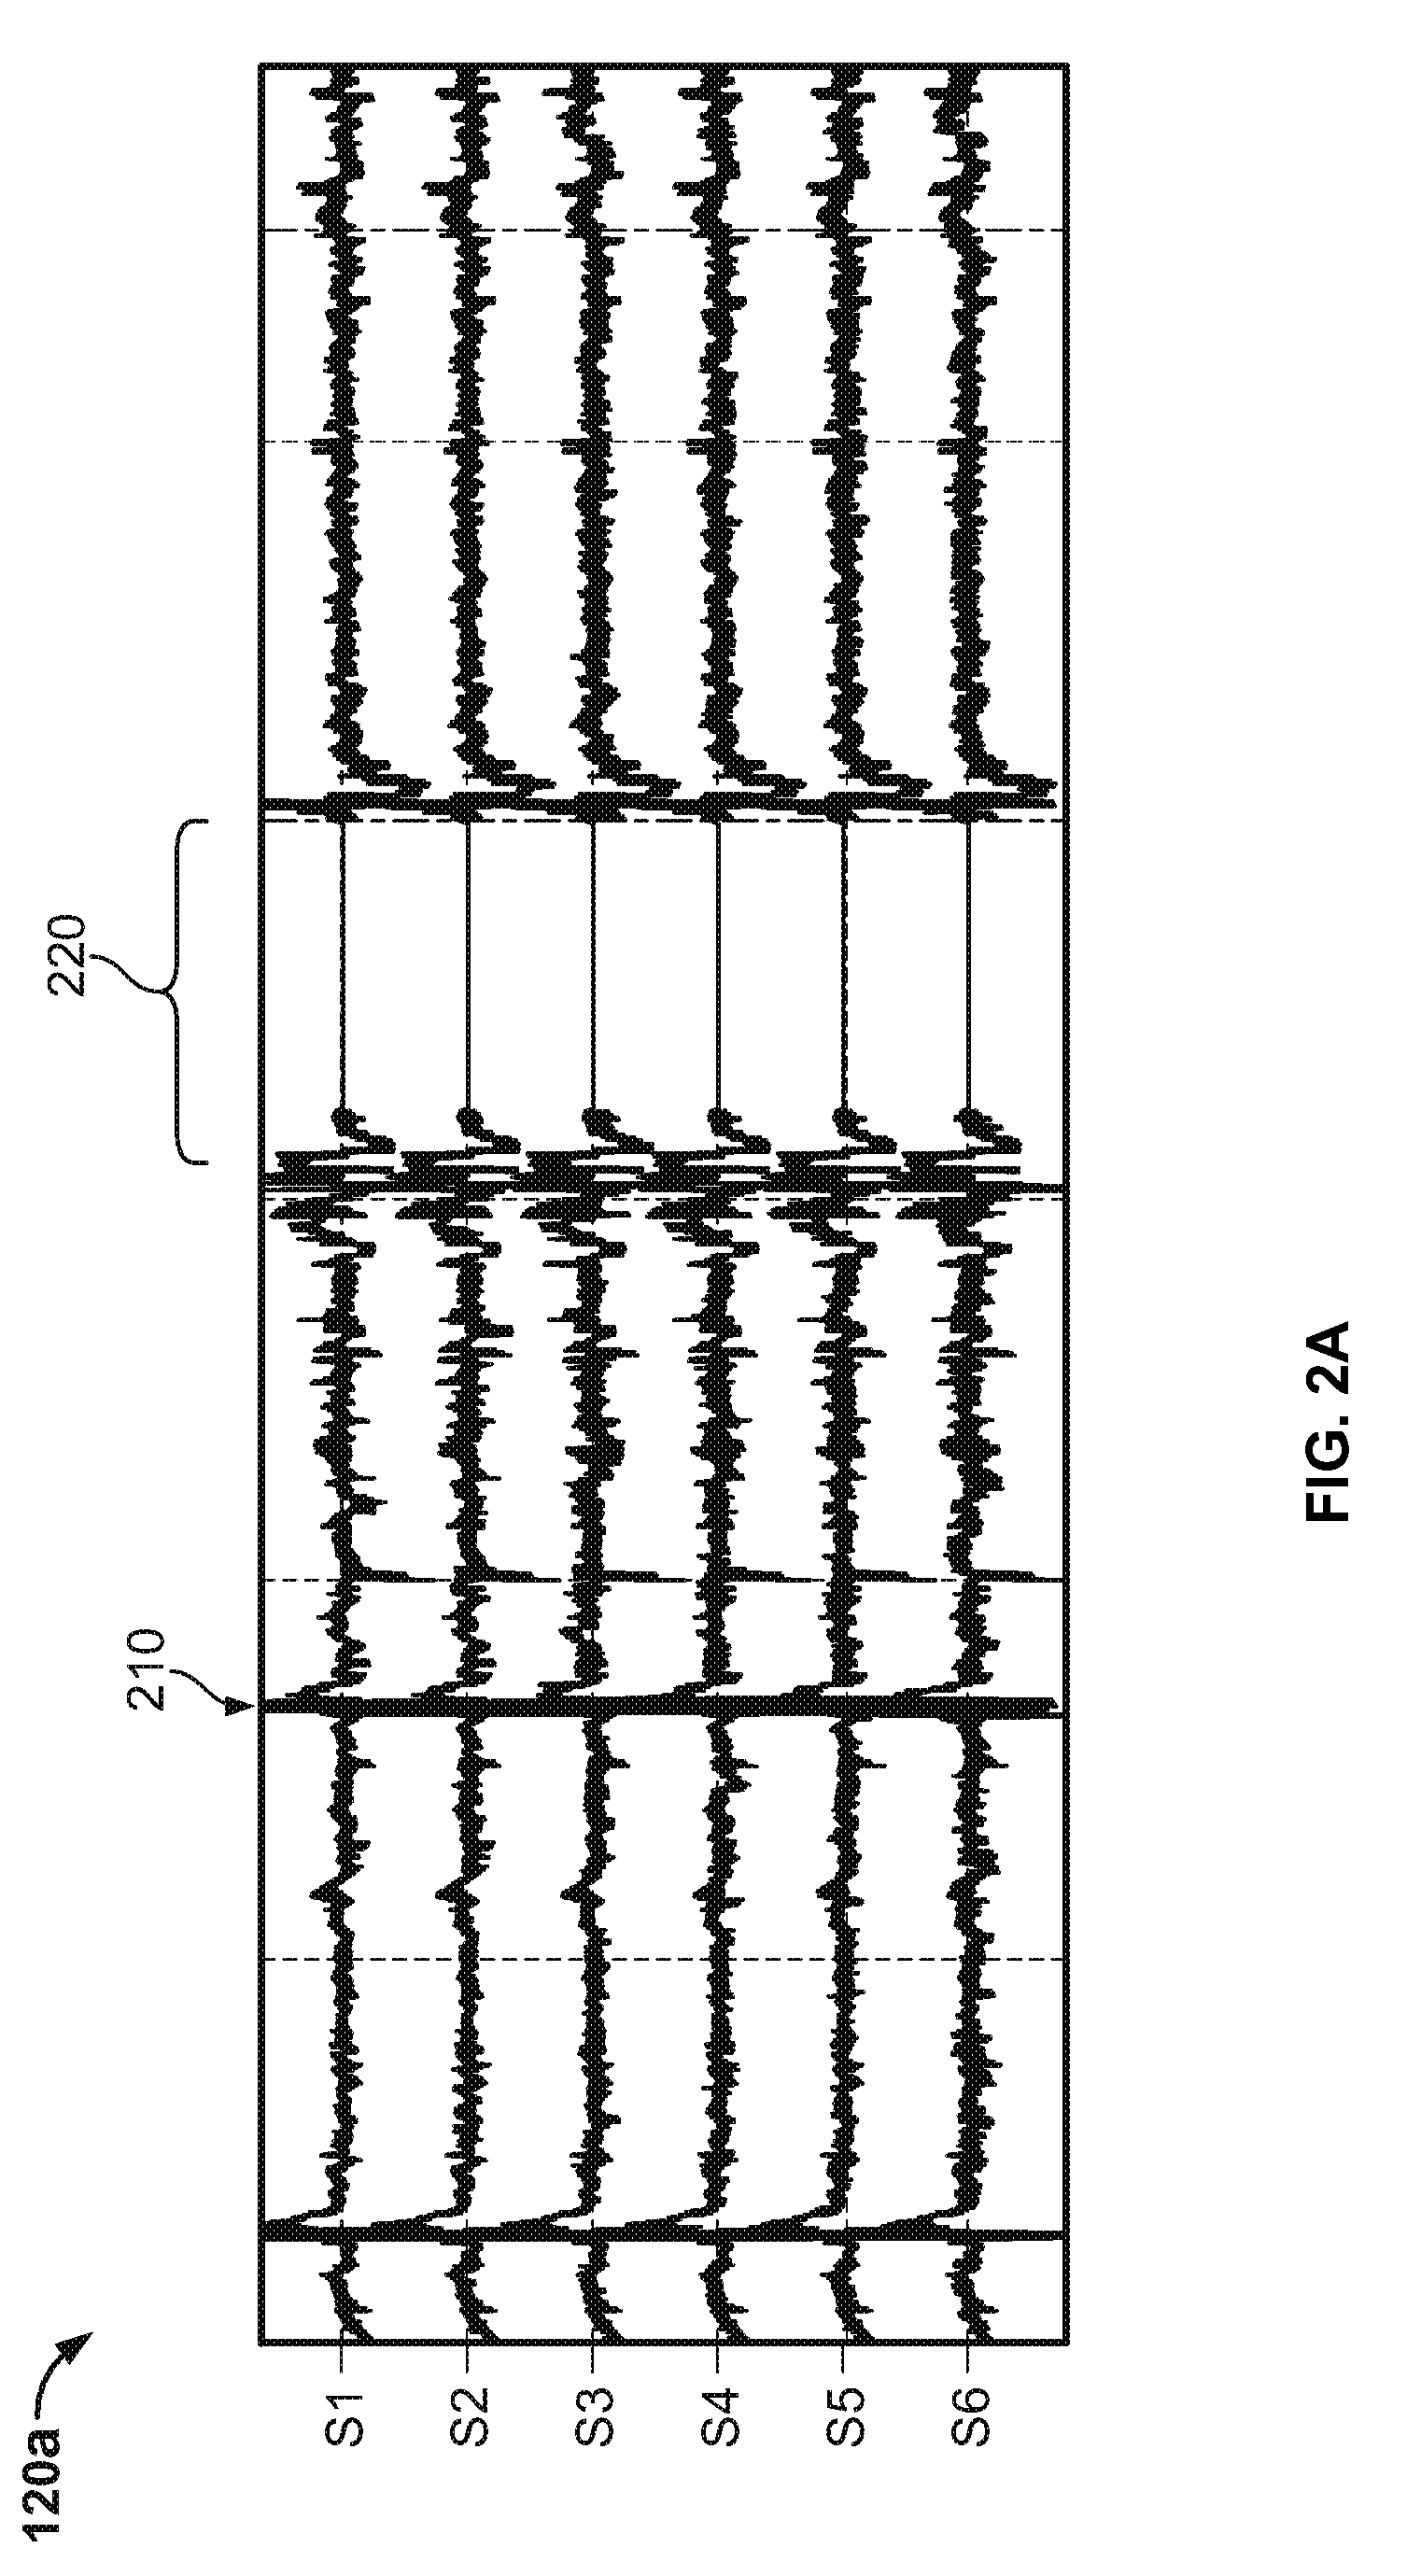 Processing for multi-channel signals